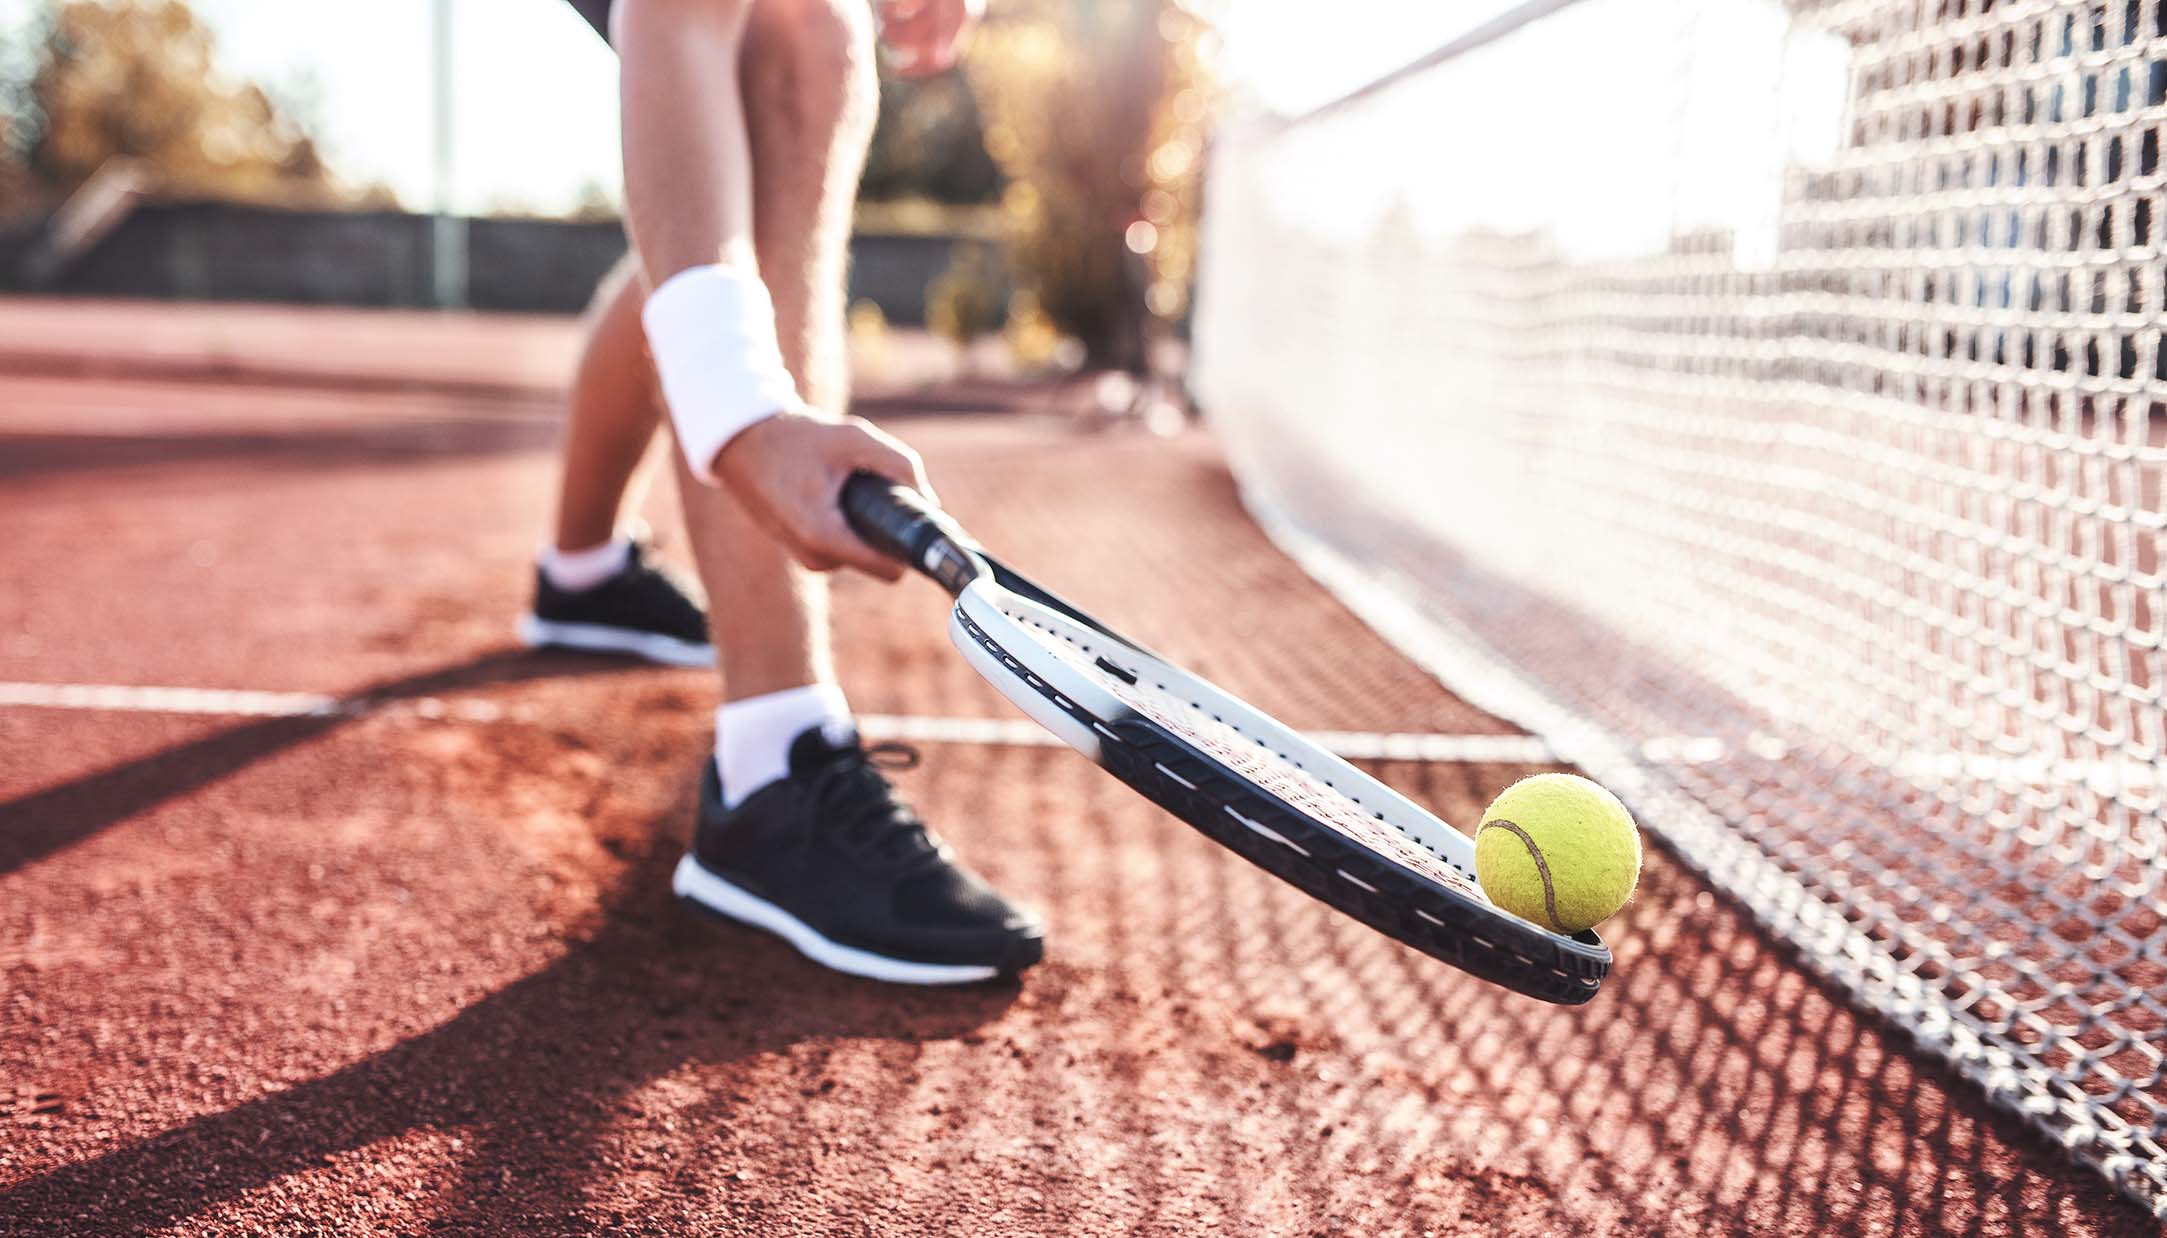 Tennis. Young man playing tennis, close up photo. Sport, recreation concept